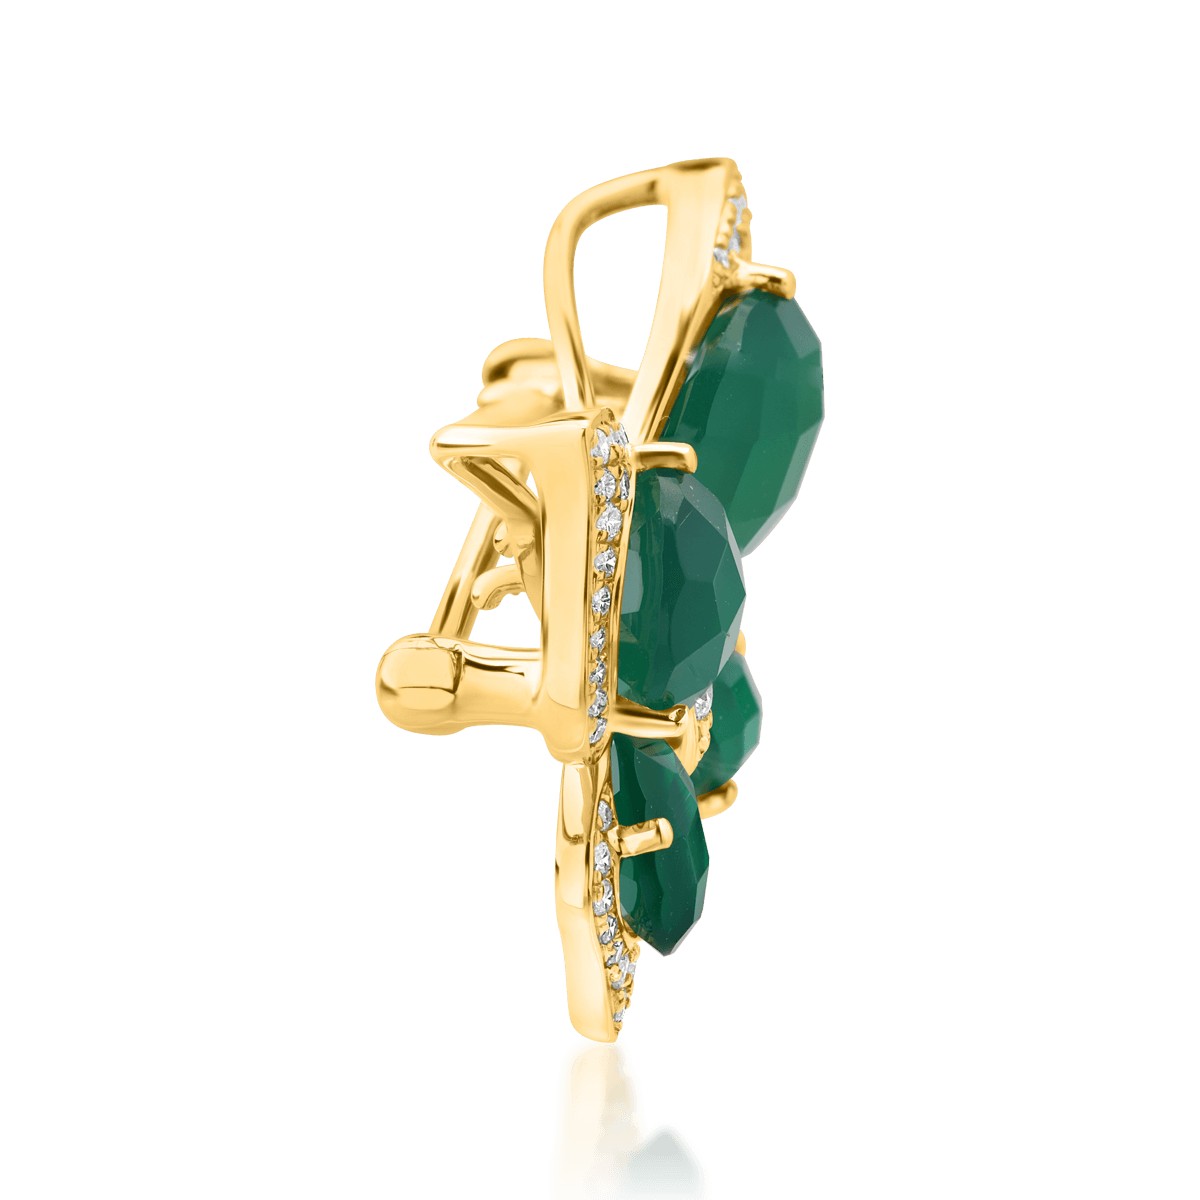 18K yellow gold brooch with 5.4ct green agate and 0.21ct diamonds